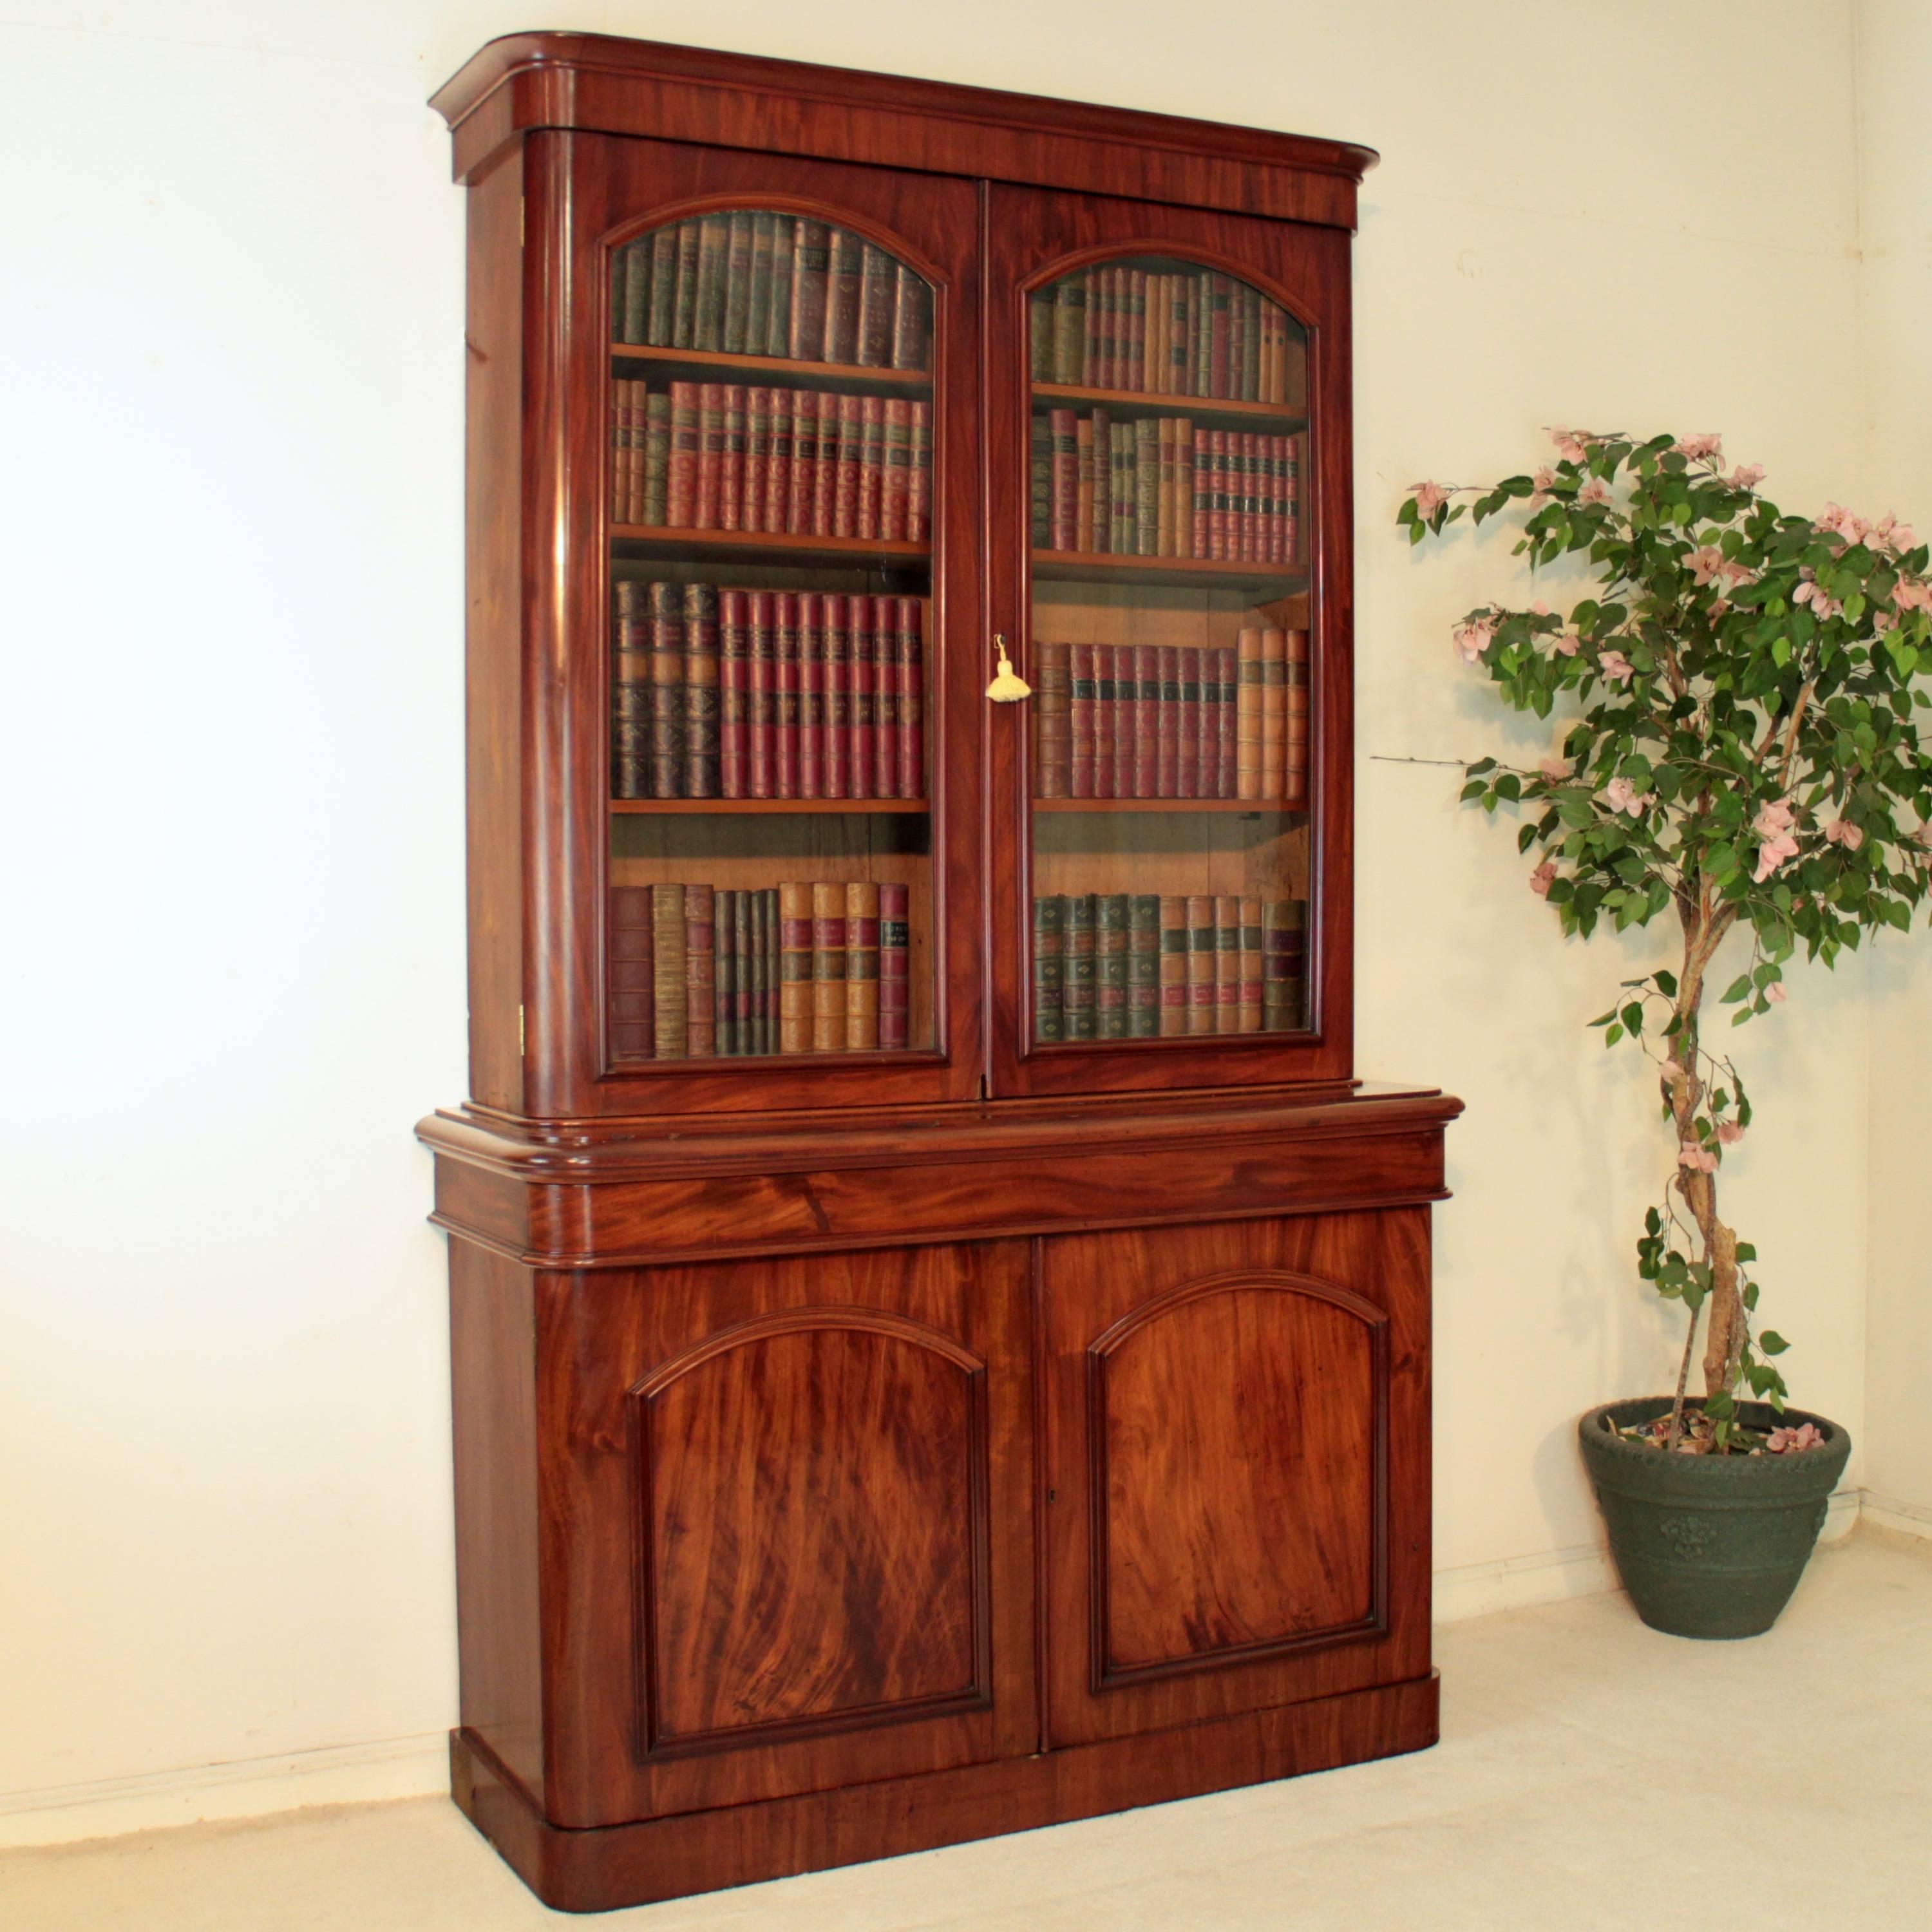 An attractive Victorian mahogany bookcase dating to circa 1870, with a moulded cornice above a pair of glazed doors enclosing three adjustable shelves, the projecting base with a concealed drawer and two panelled cupboard doors, all standing on a